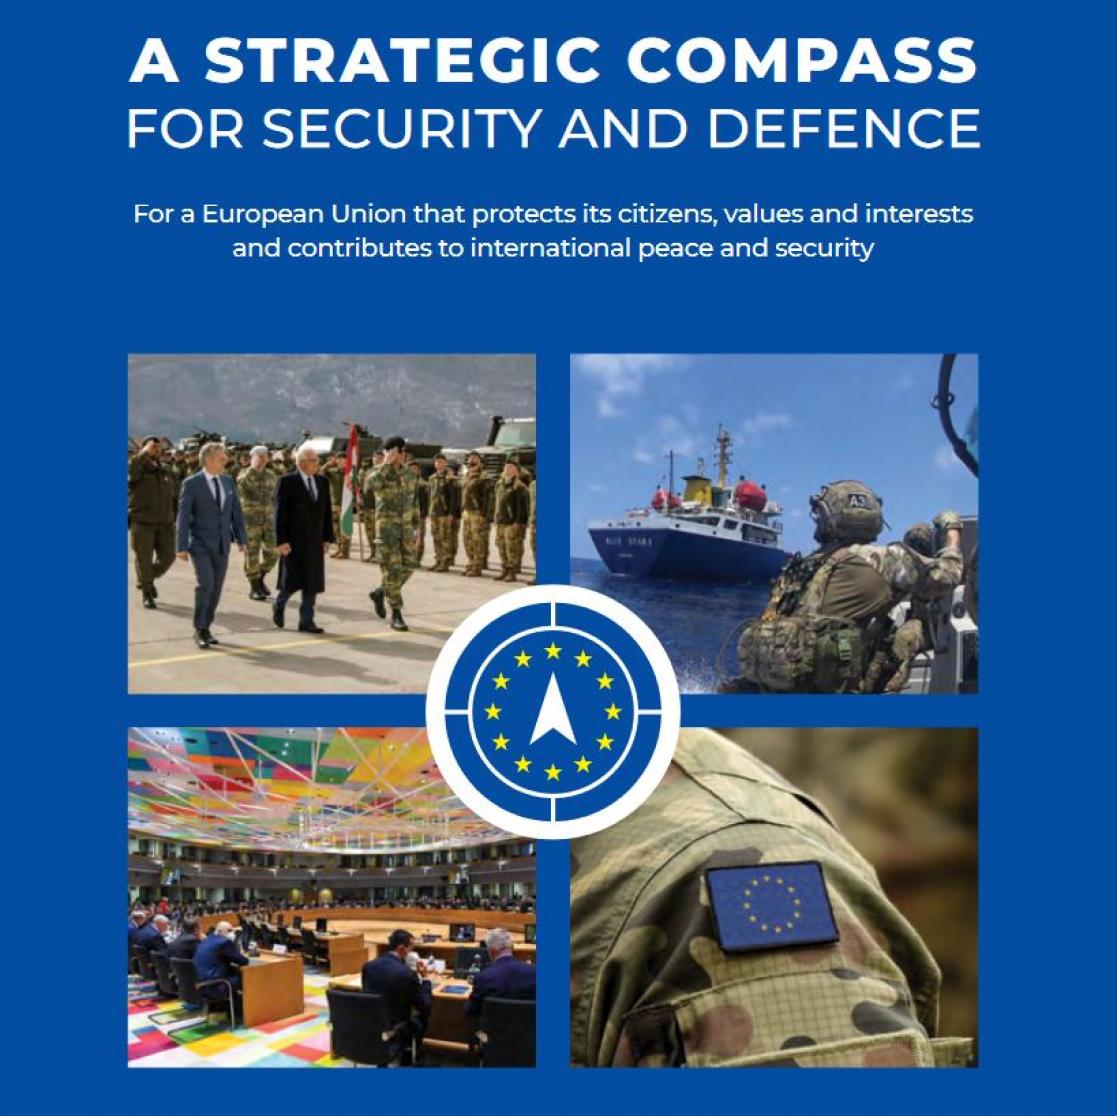 Cover of the Strategic Compass